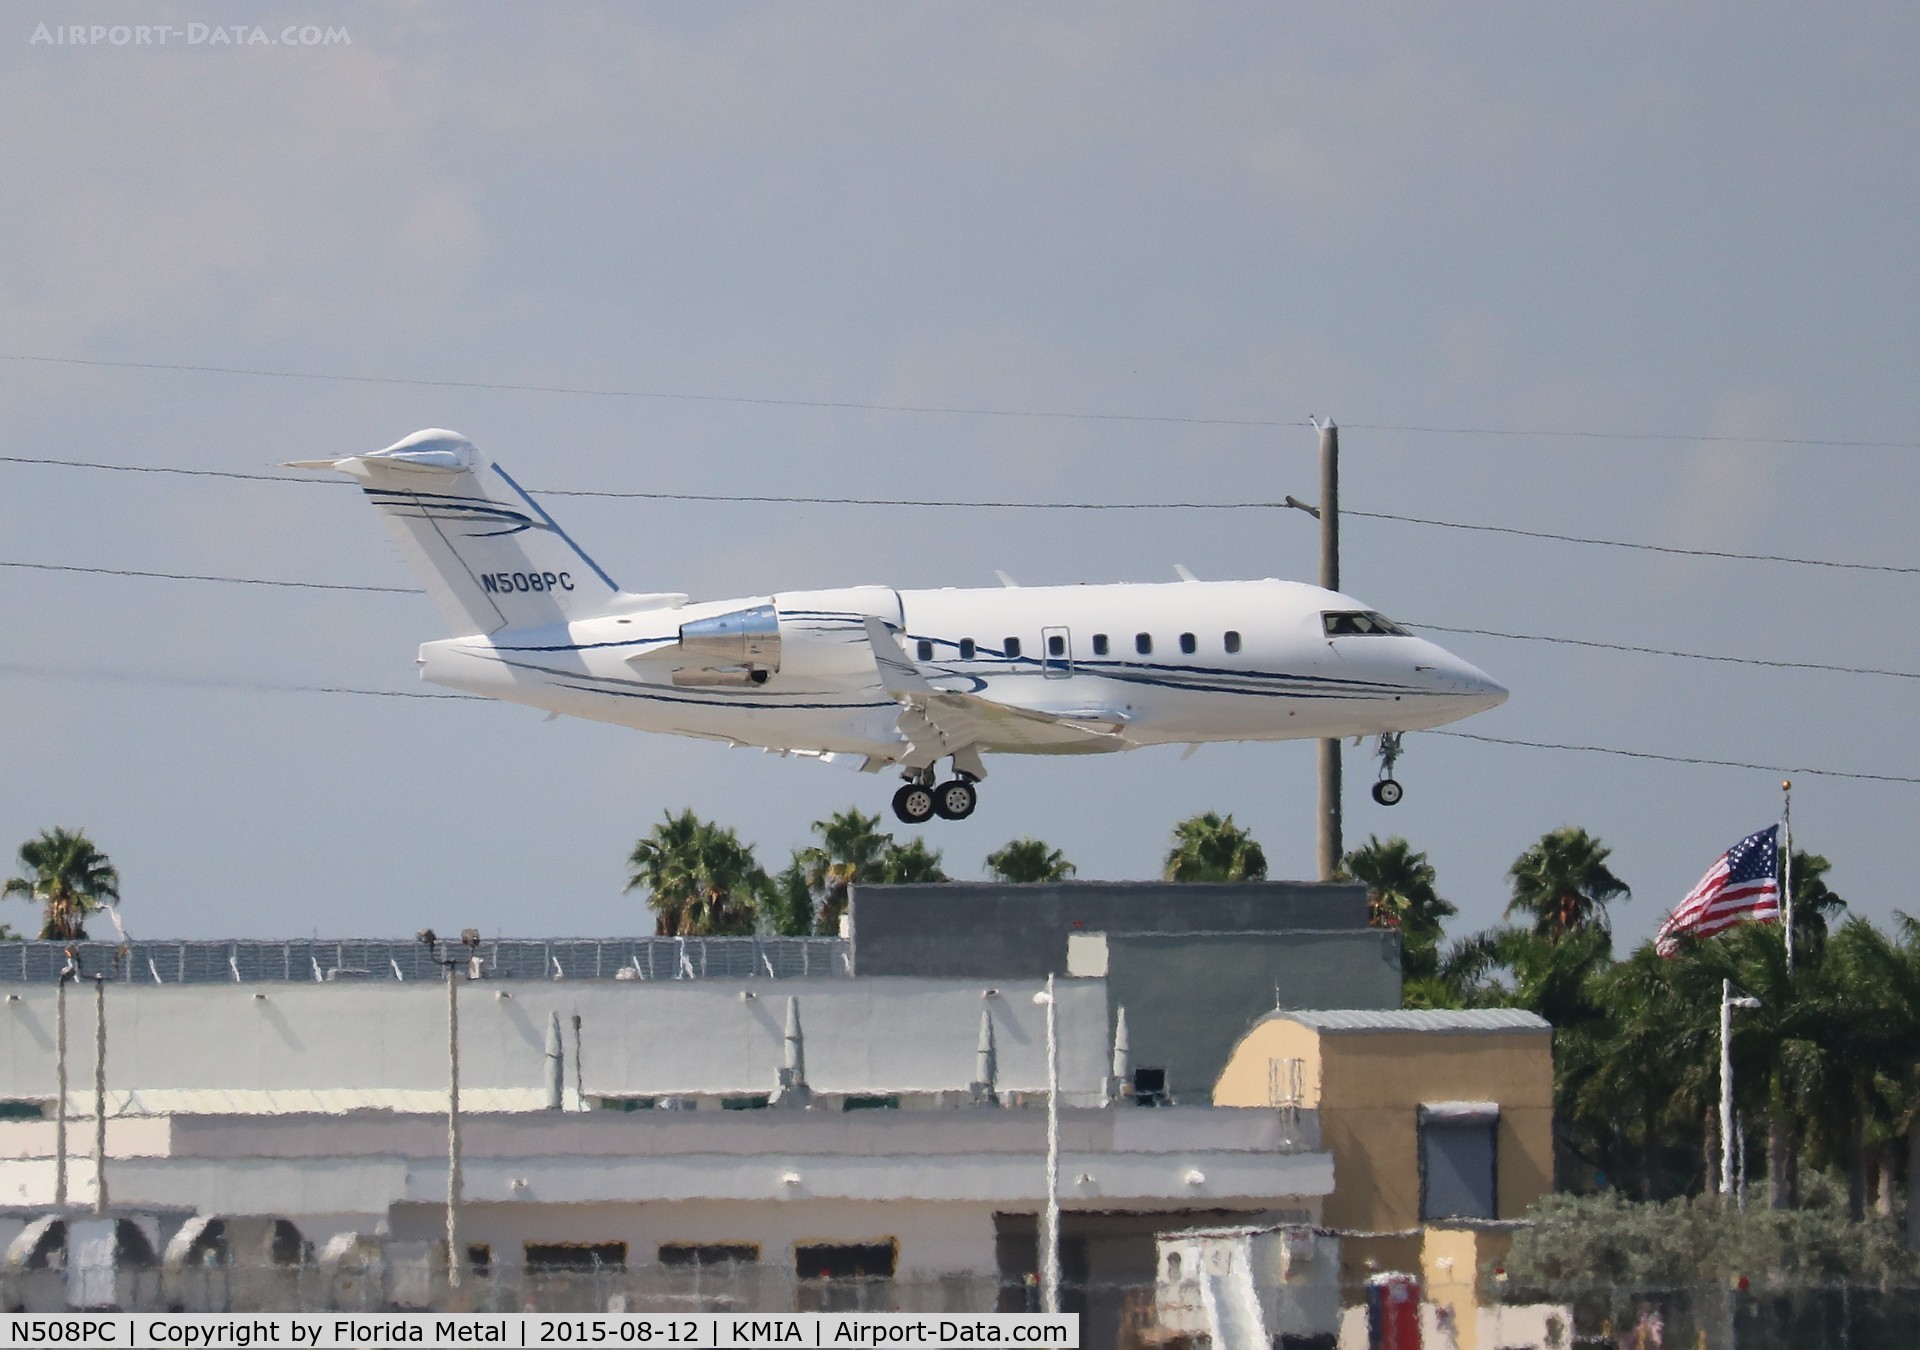 N508PC, 2003 Bombardier Challenger 604 (CL-600-2B16) C/N 5558, Challenger 604 zx